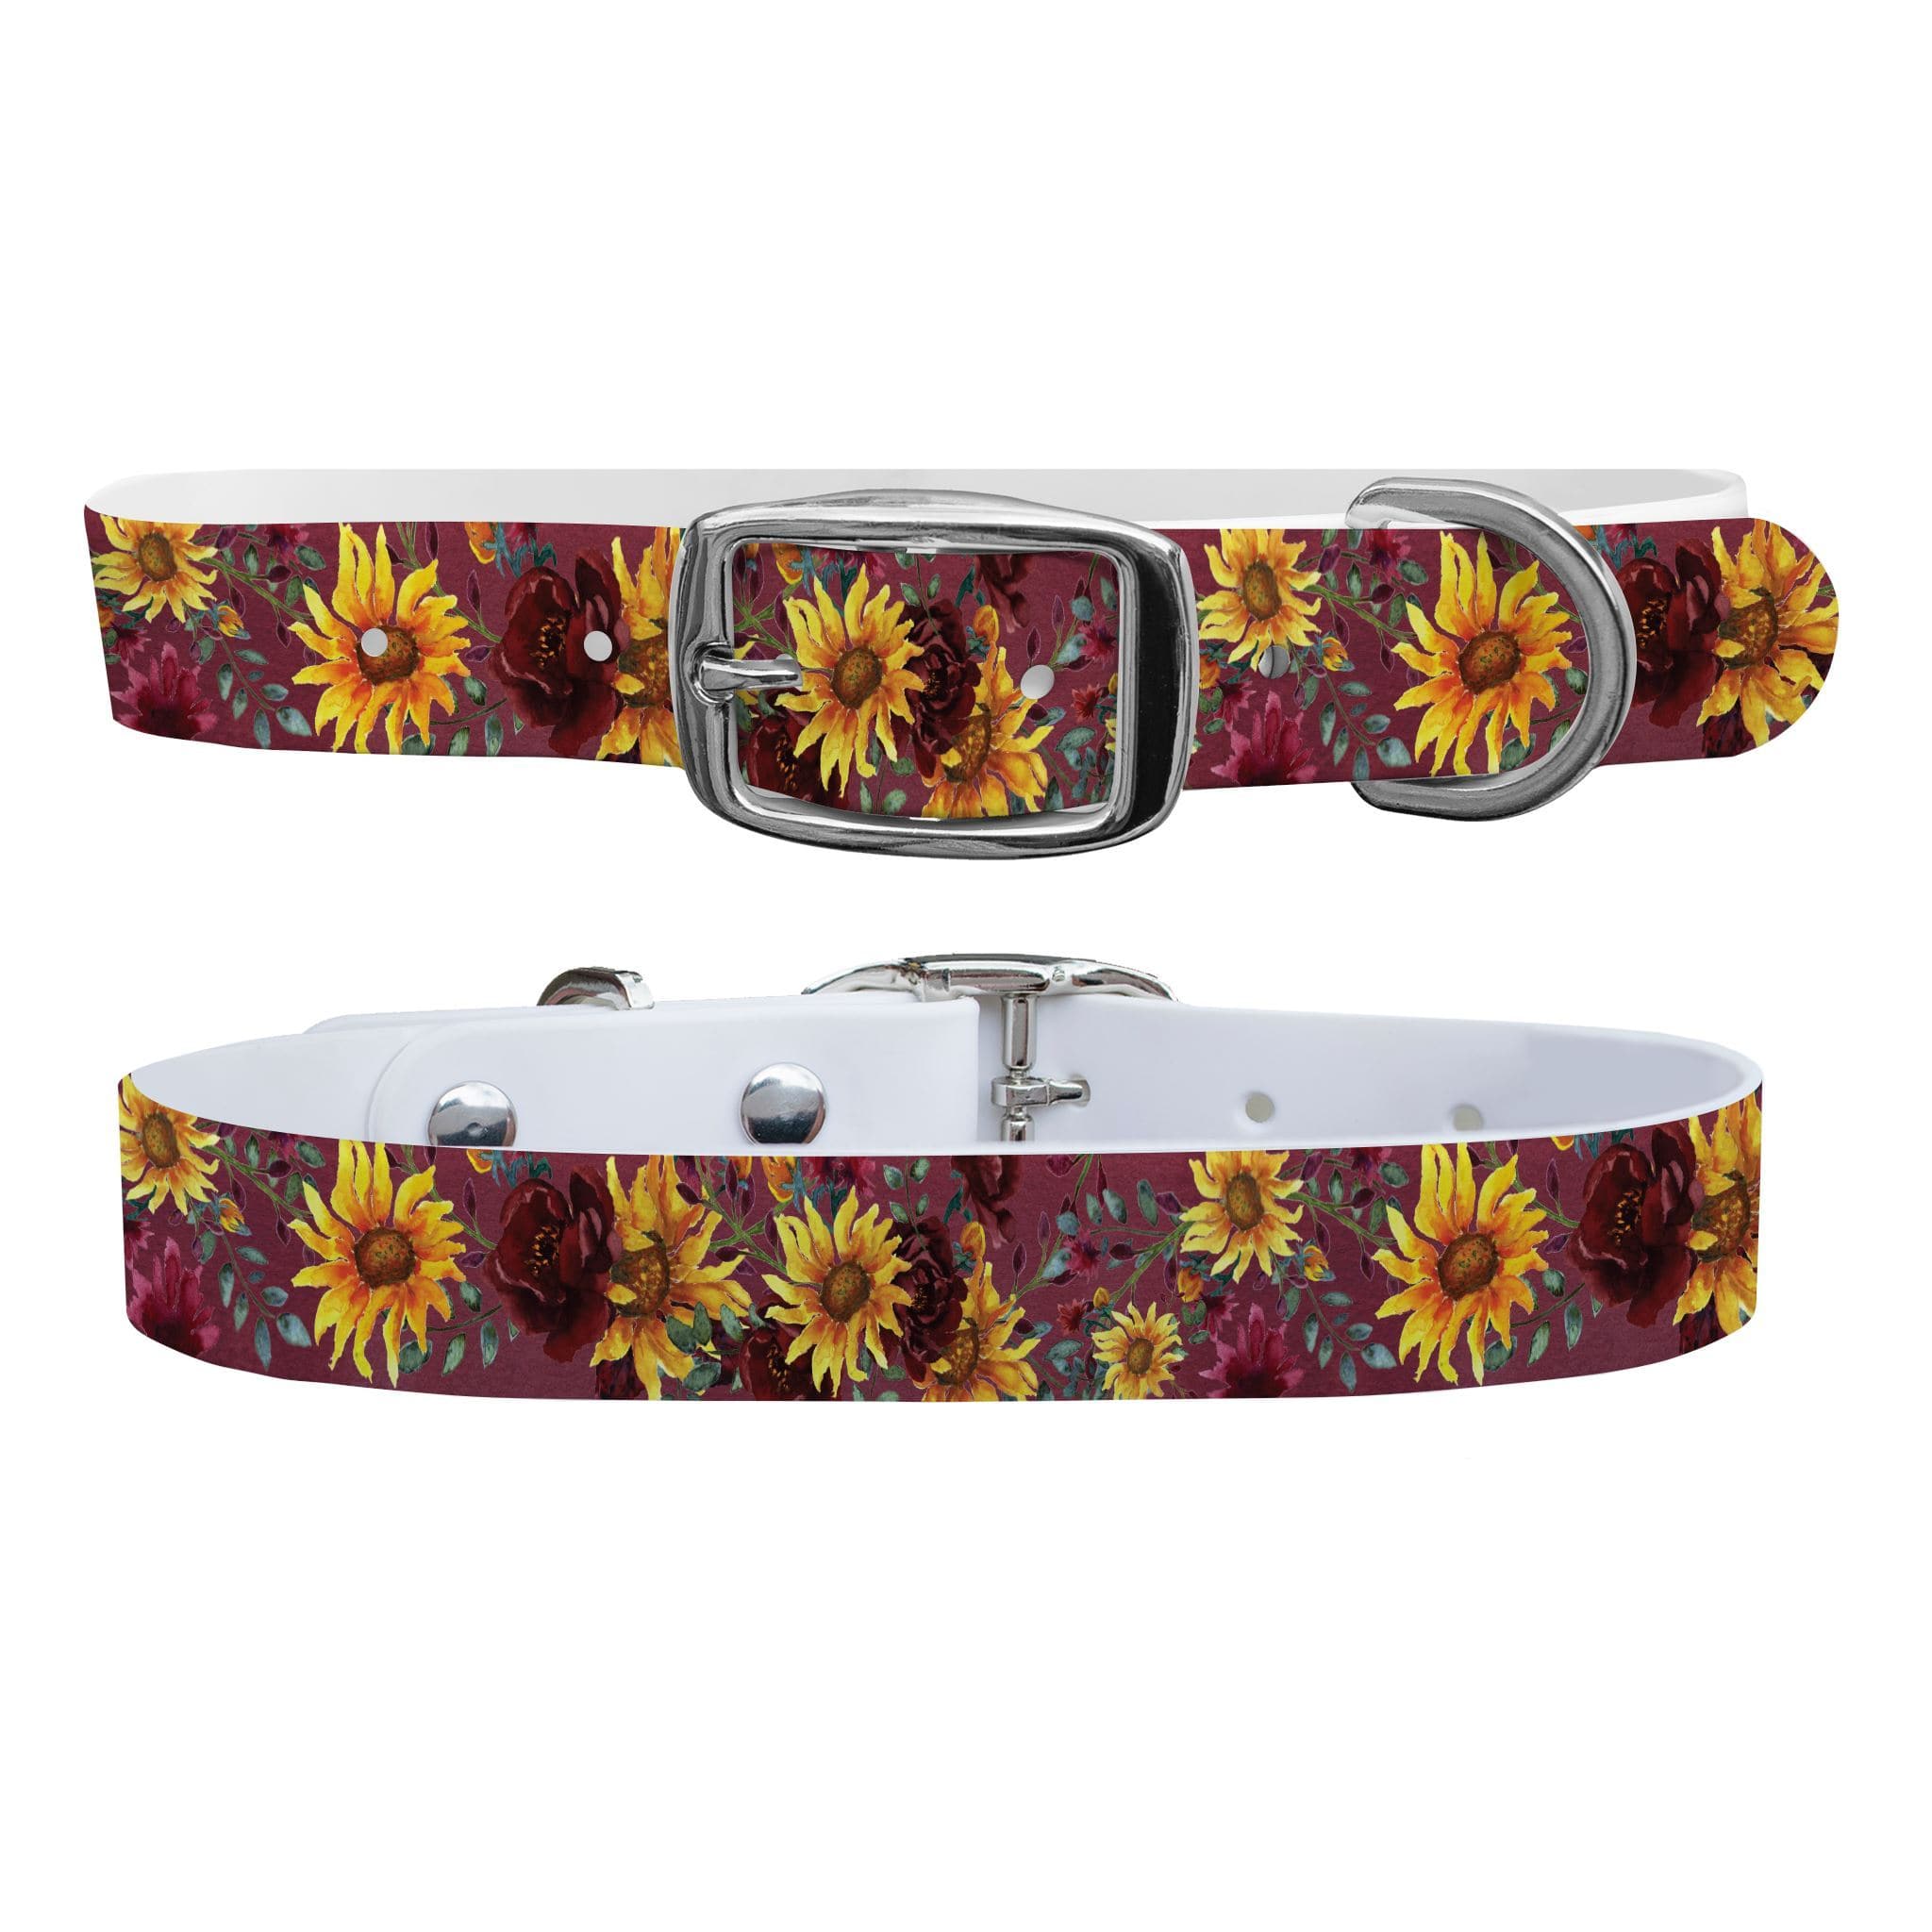 Merlot Sunflowers Dog Collar With Silver Buckle - Small